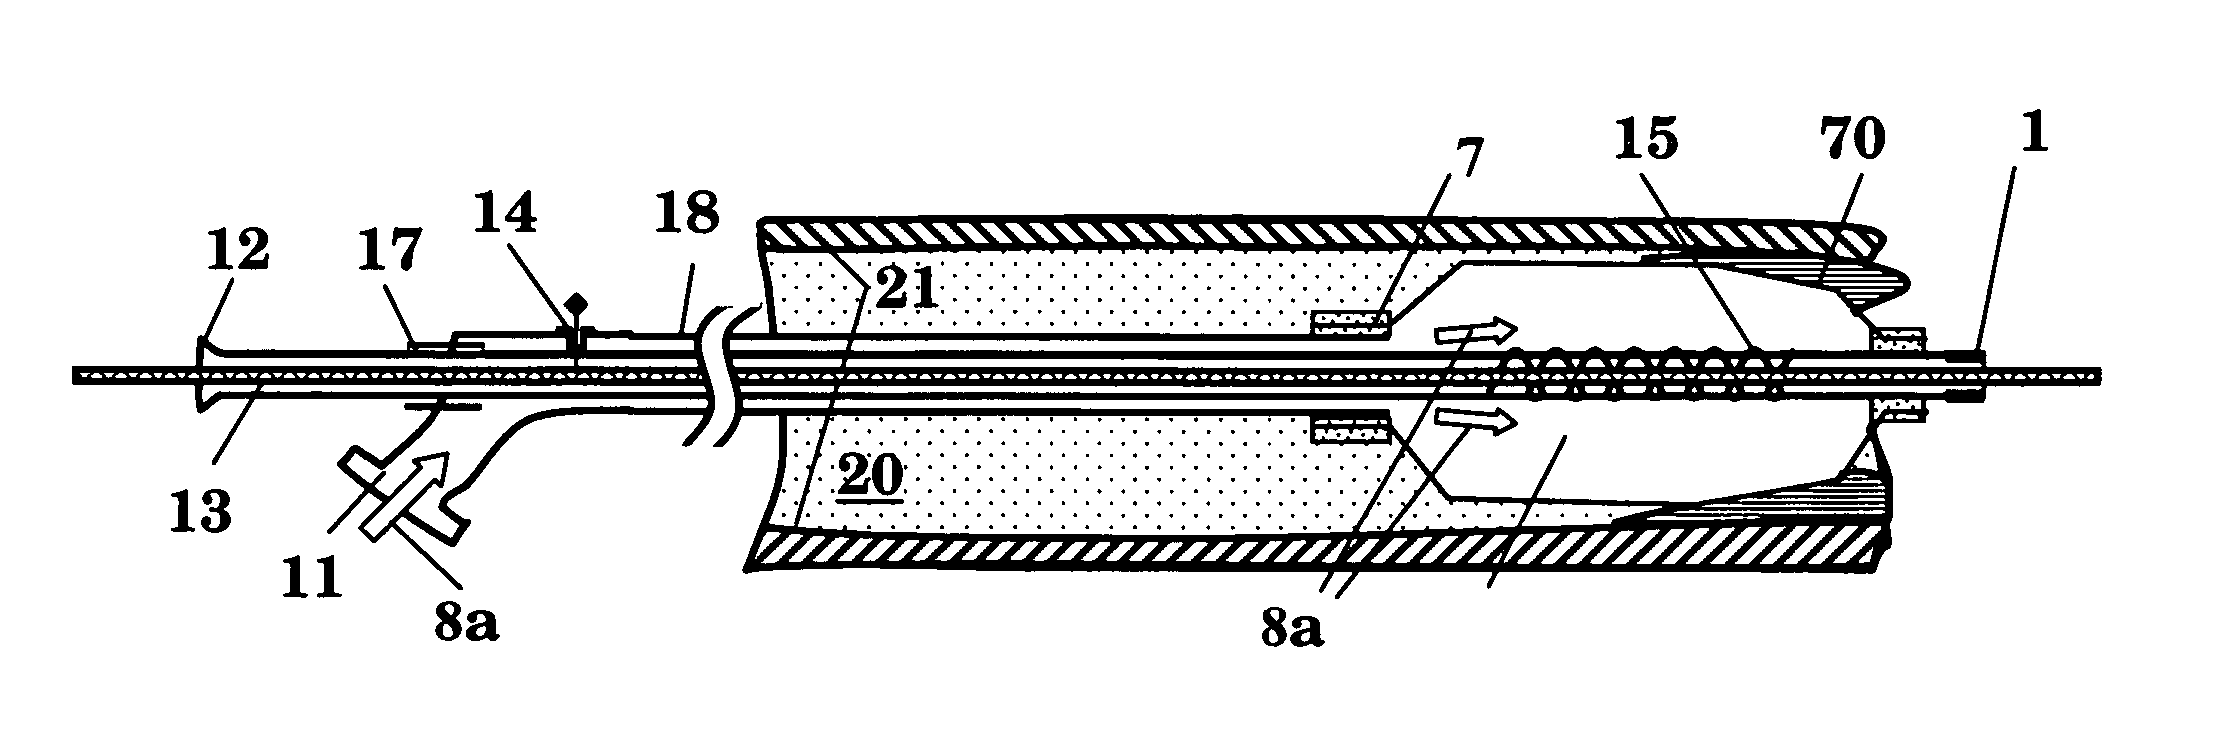 Balloon catheter system for treating vascular occlusions